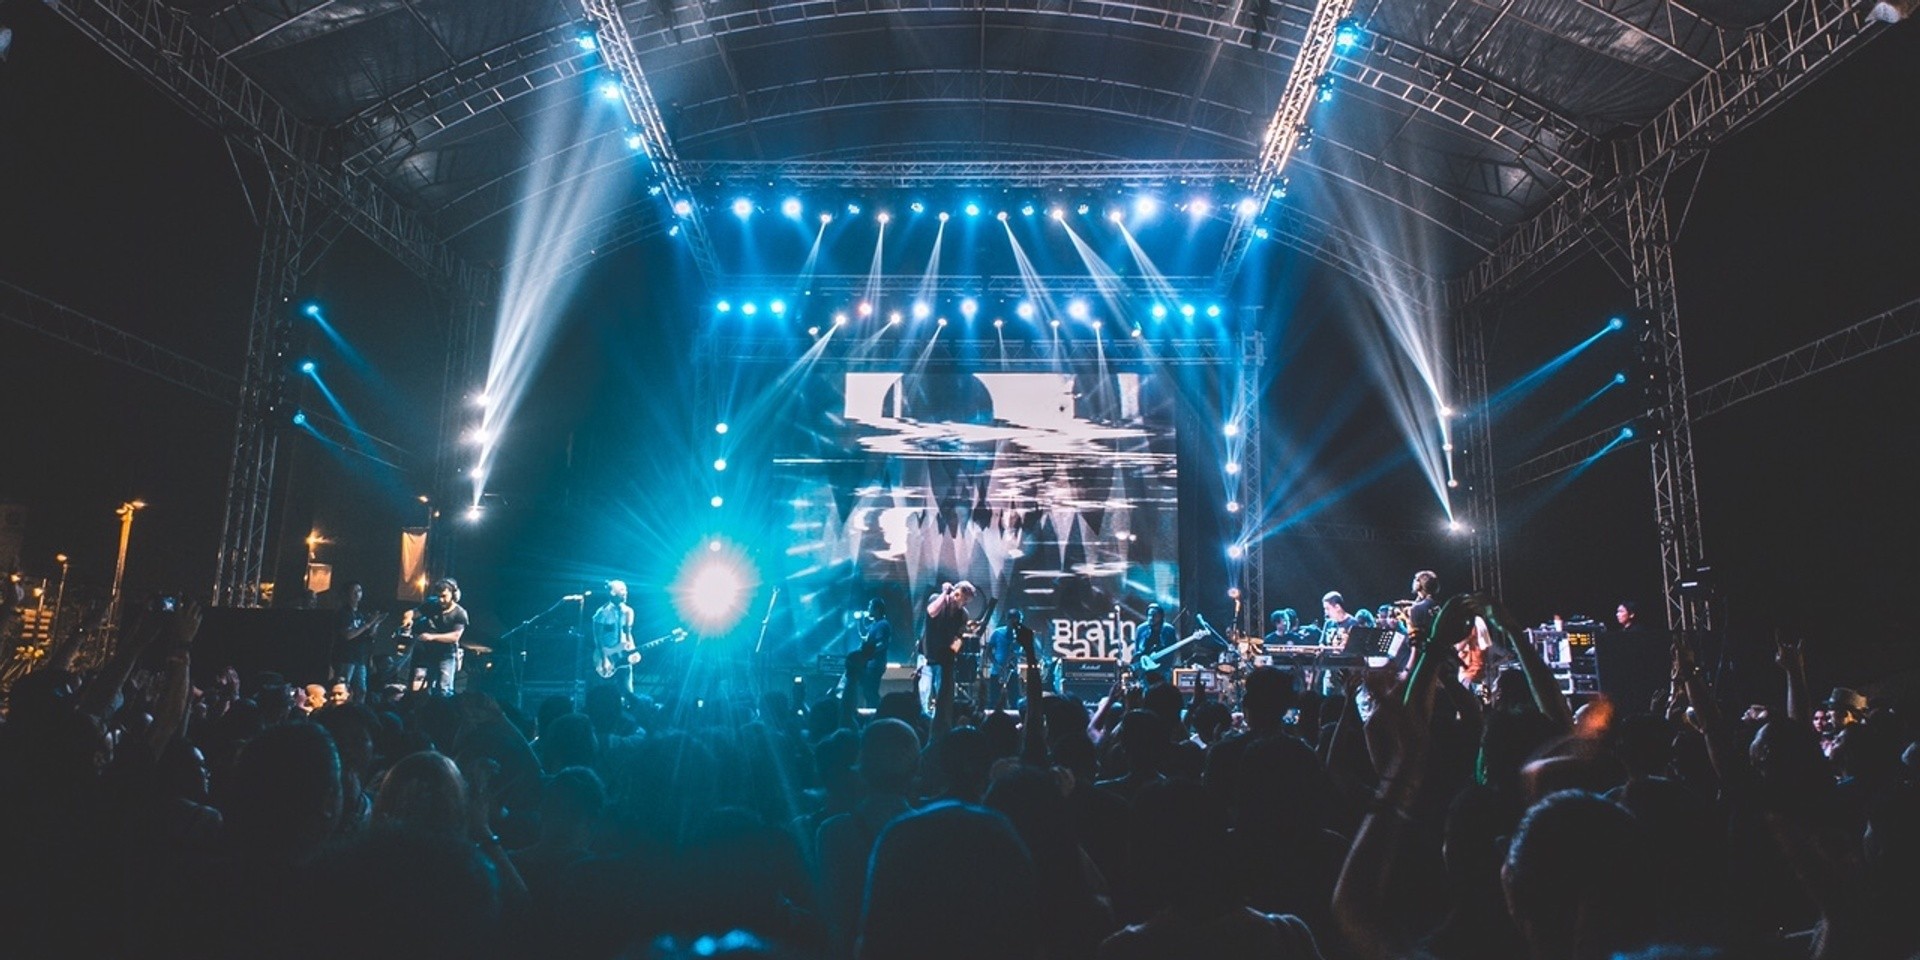 PHOTO GALLERY: Jack Daniel's Future Legends IndieFest 2016 Highlights